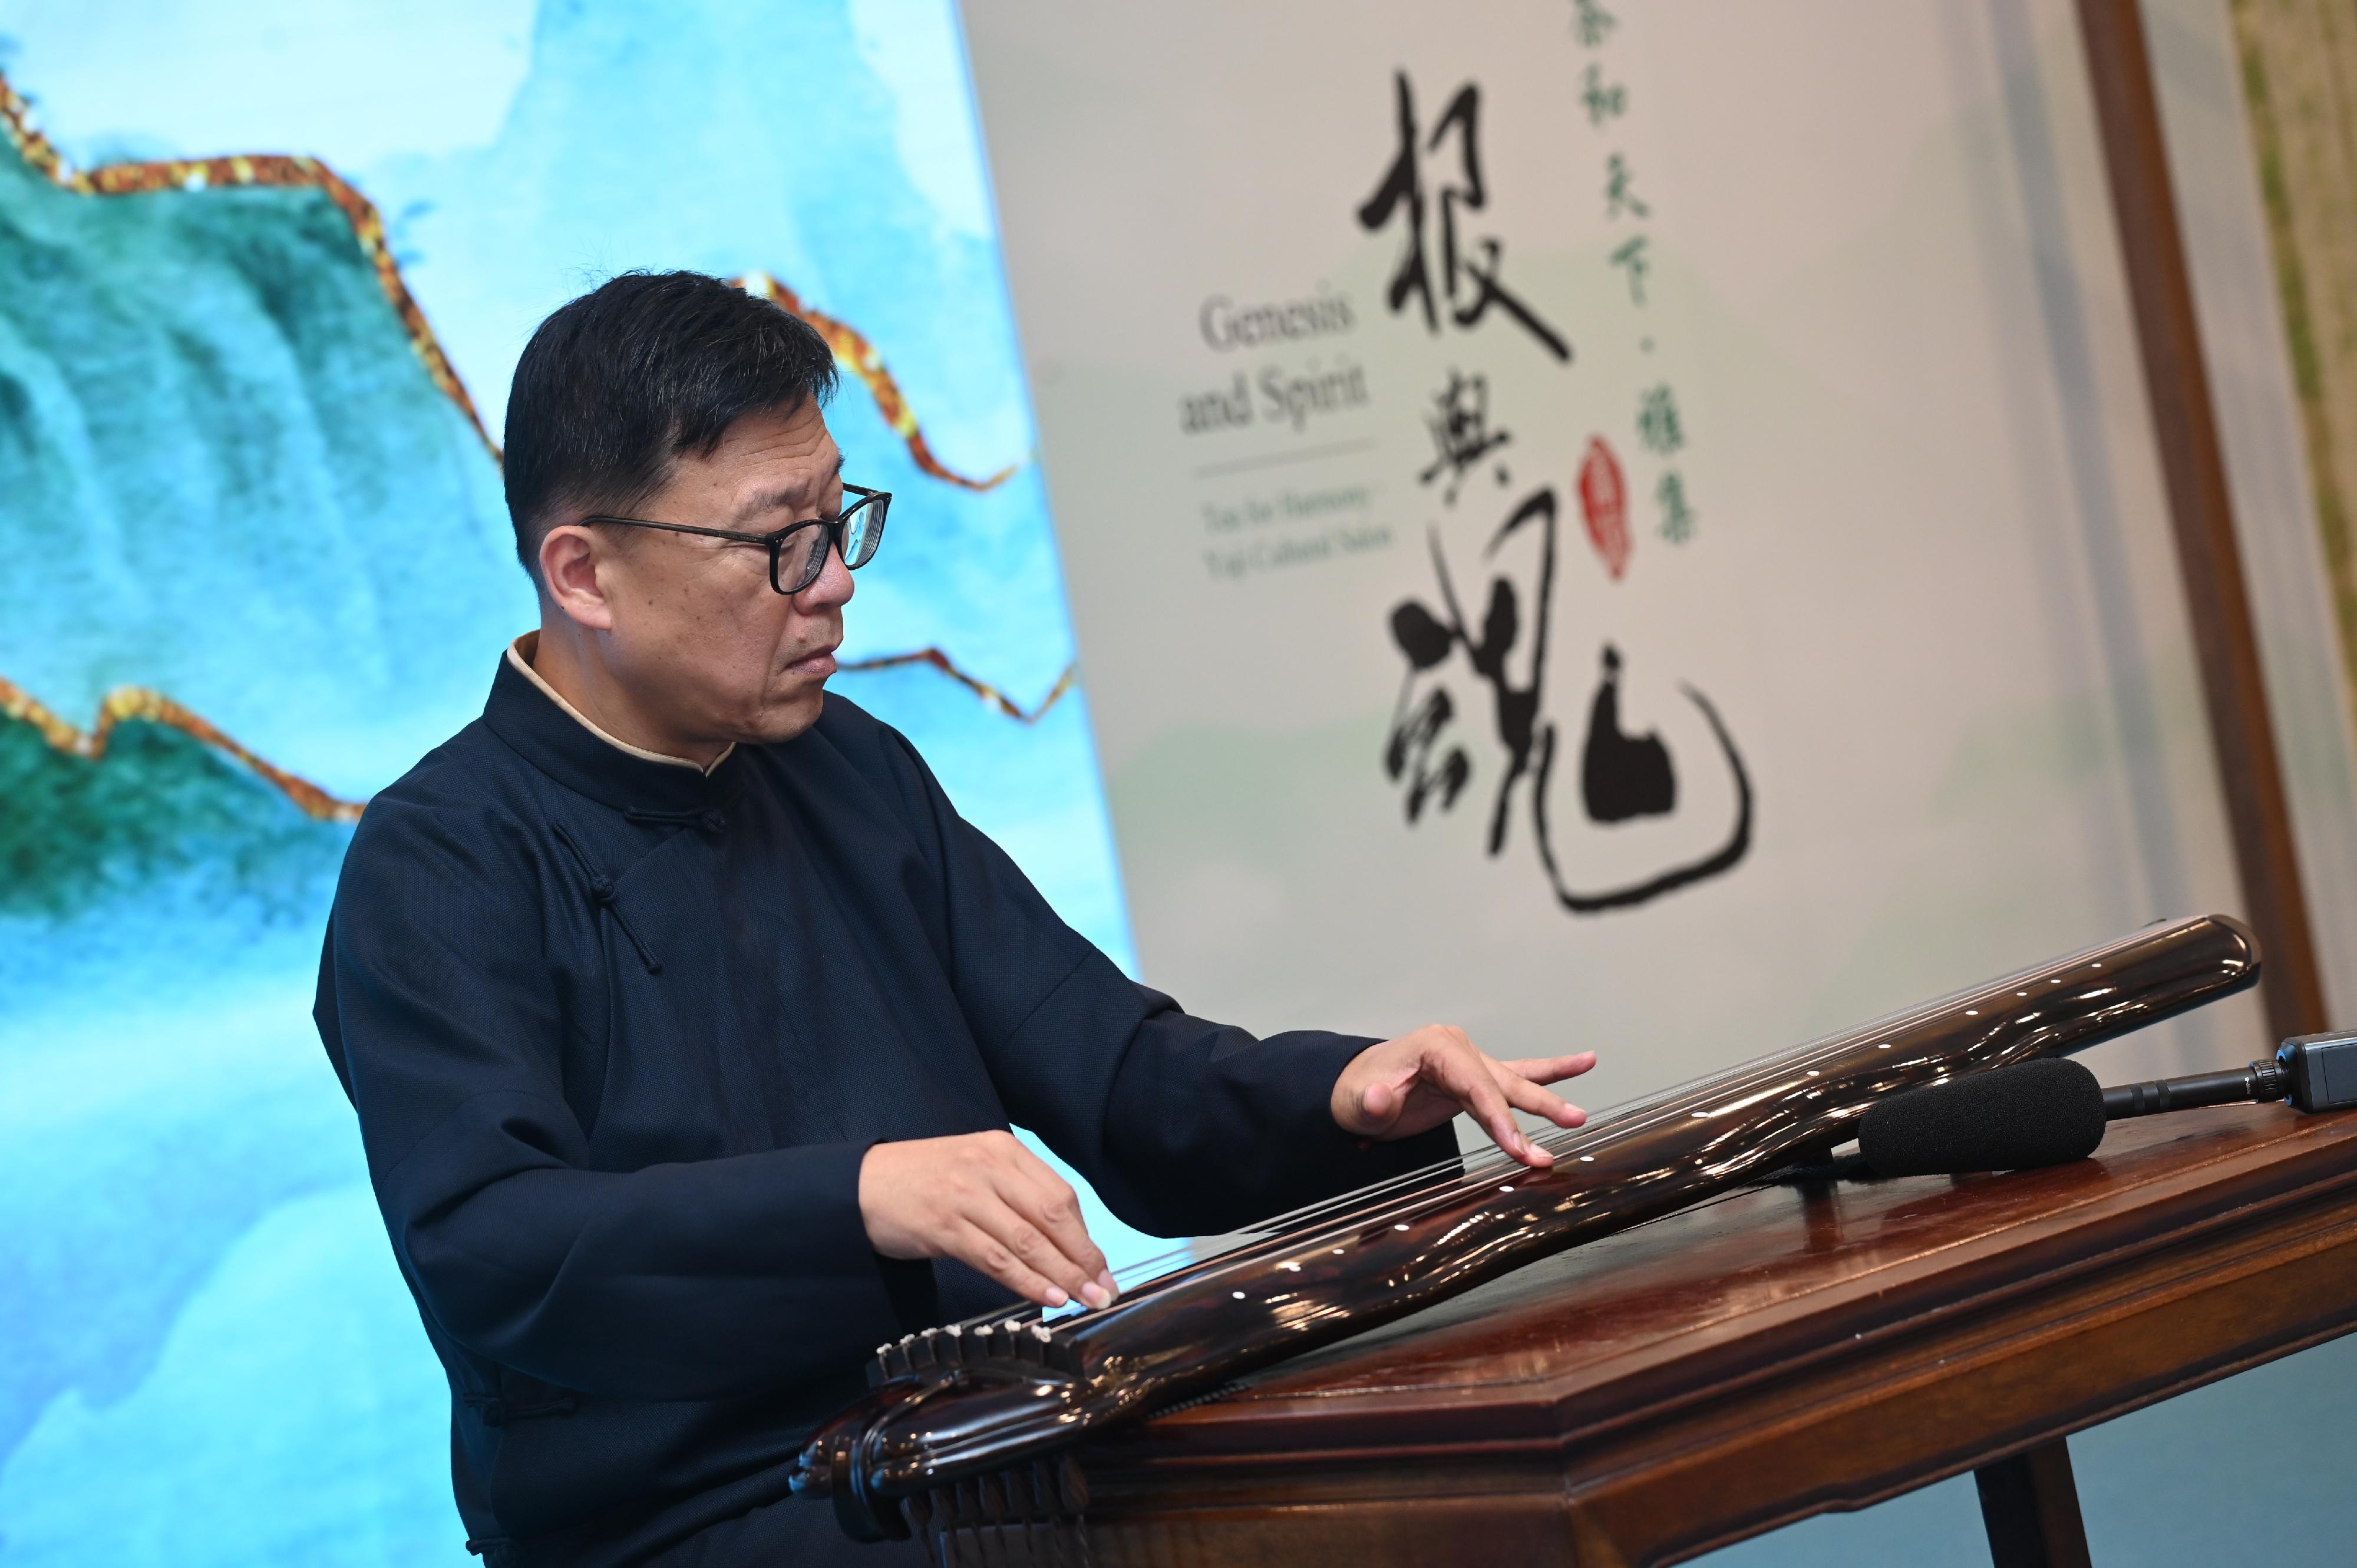 The opening ceremony for the "Genesis and Spirit - Tea for Harmony · Yaji Cultural Salon: Exhibition of the Tea Culture of Zhejiang" was held today (August 4) at the Hong Kong Central Library. Photo shows a performance titled "Flowing Water" of the world intangible cultural heritage item guqin and its music (Zhejiang School).